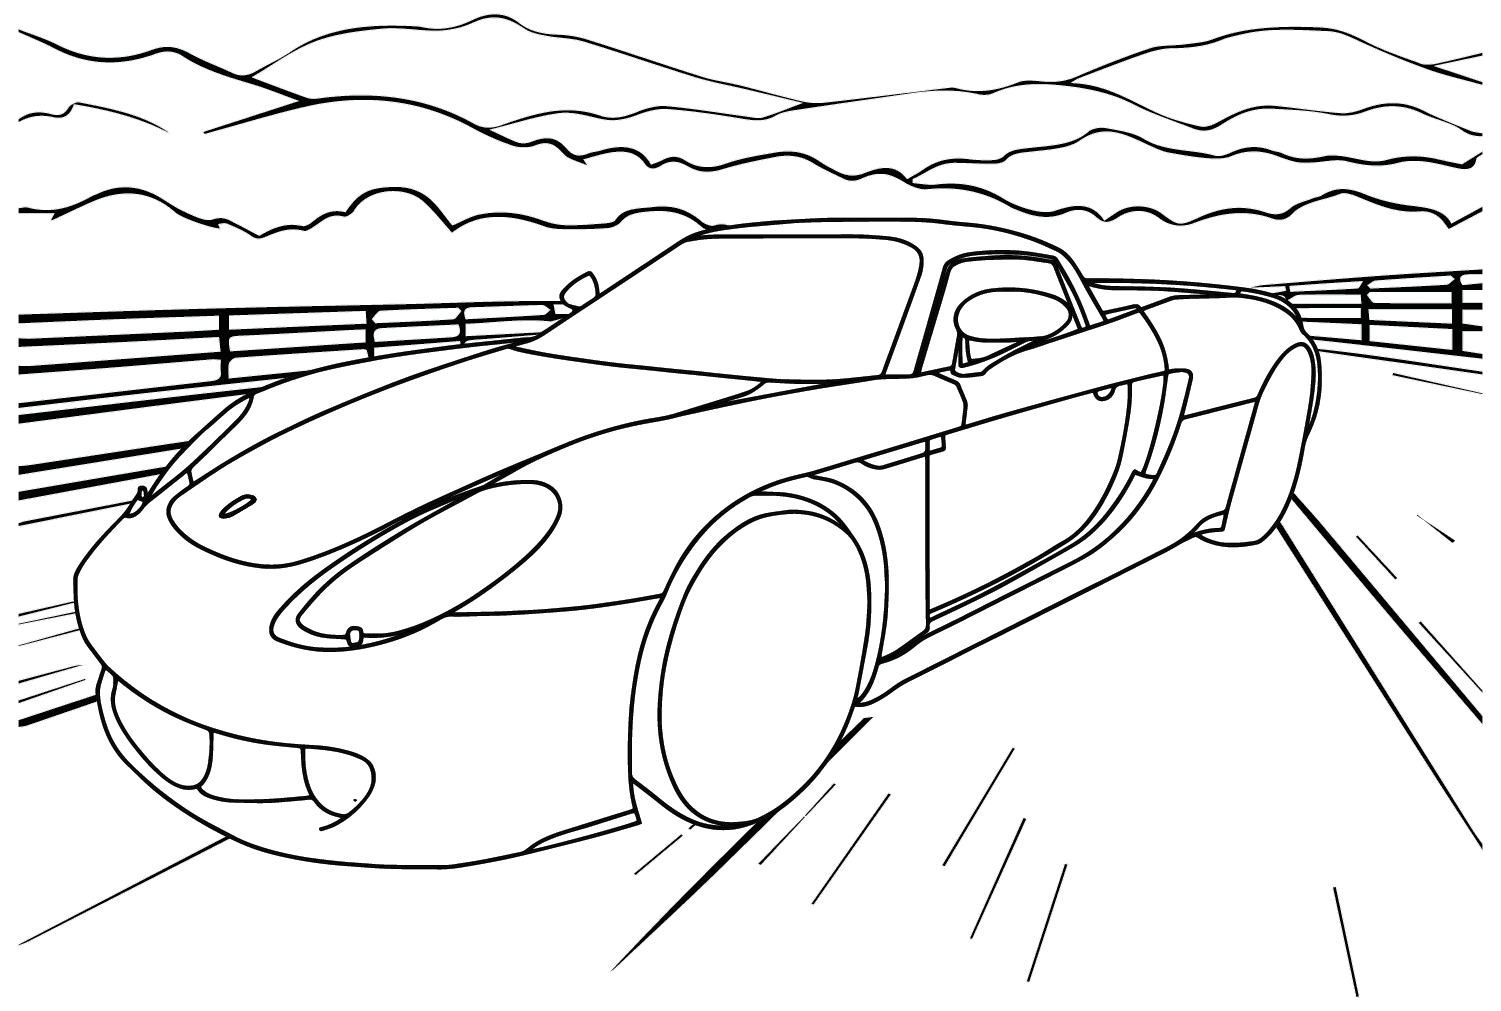 Porsche Carrera GT Coloring Page - Free Printable Coloring Pages